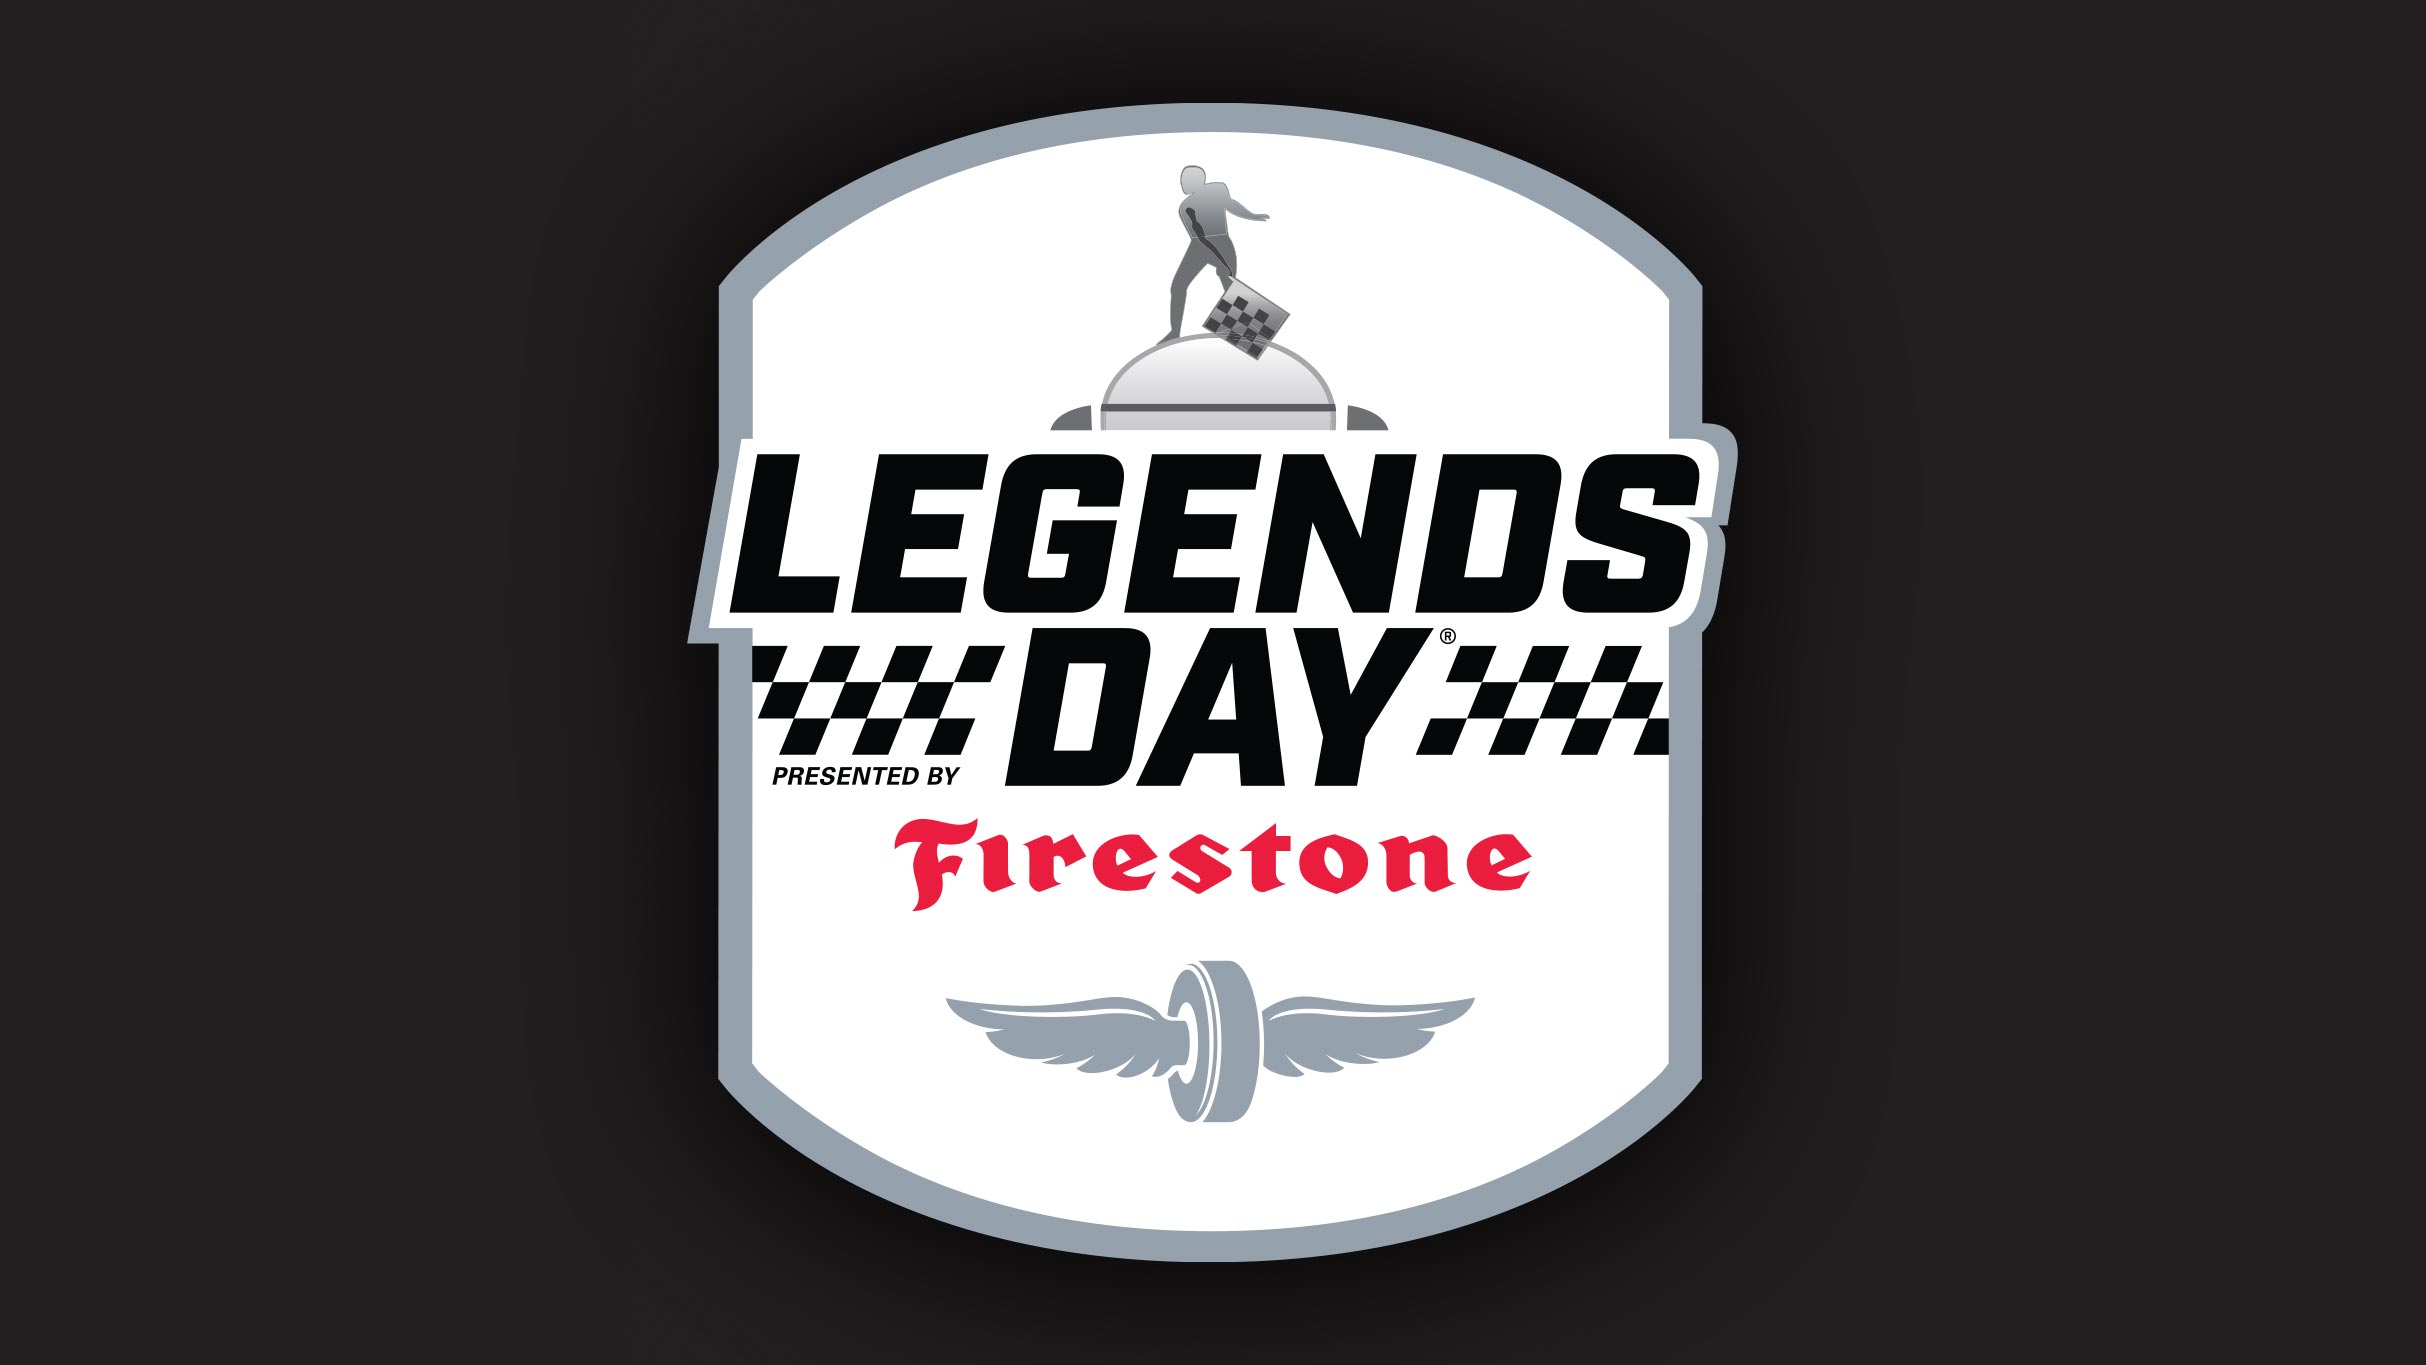 Firestone Legends Day Concert Featuring Brad Paisley in Indianapolis promo photo for Concert Week Promotion presale offer code